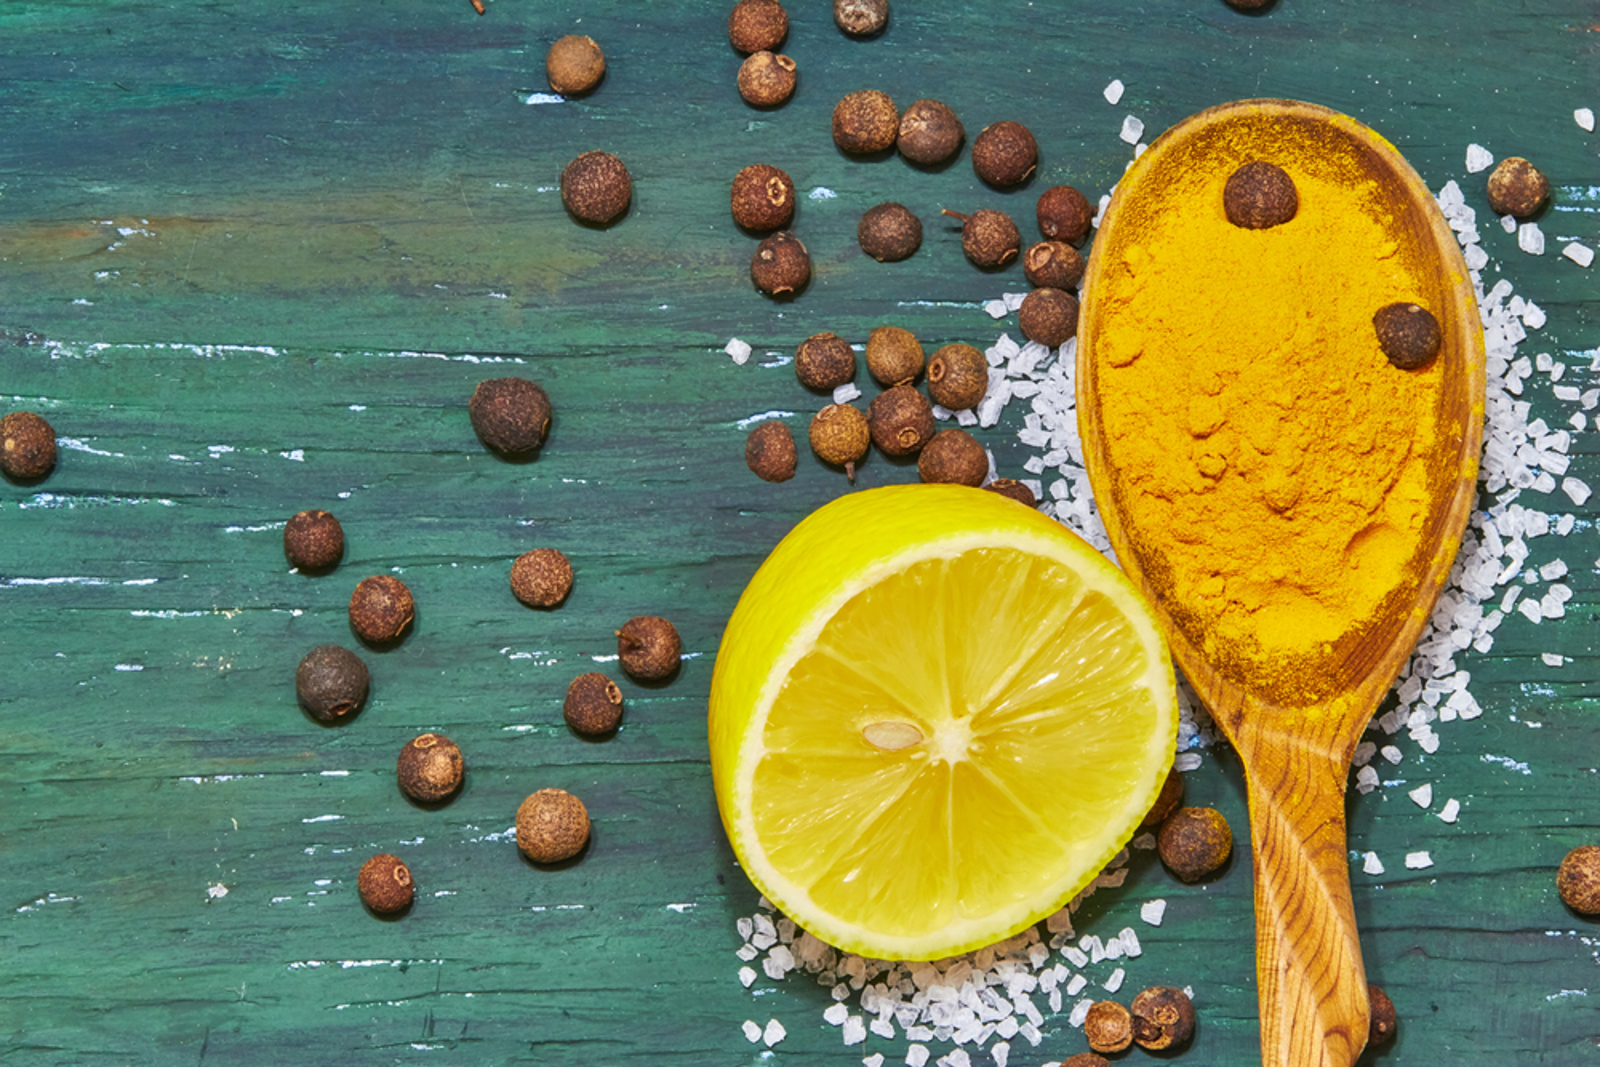 How to Use Ginger, Turmeric, and Lemon to Care for the Body Naturally